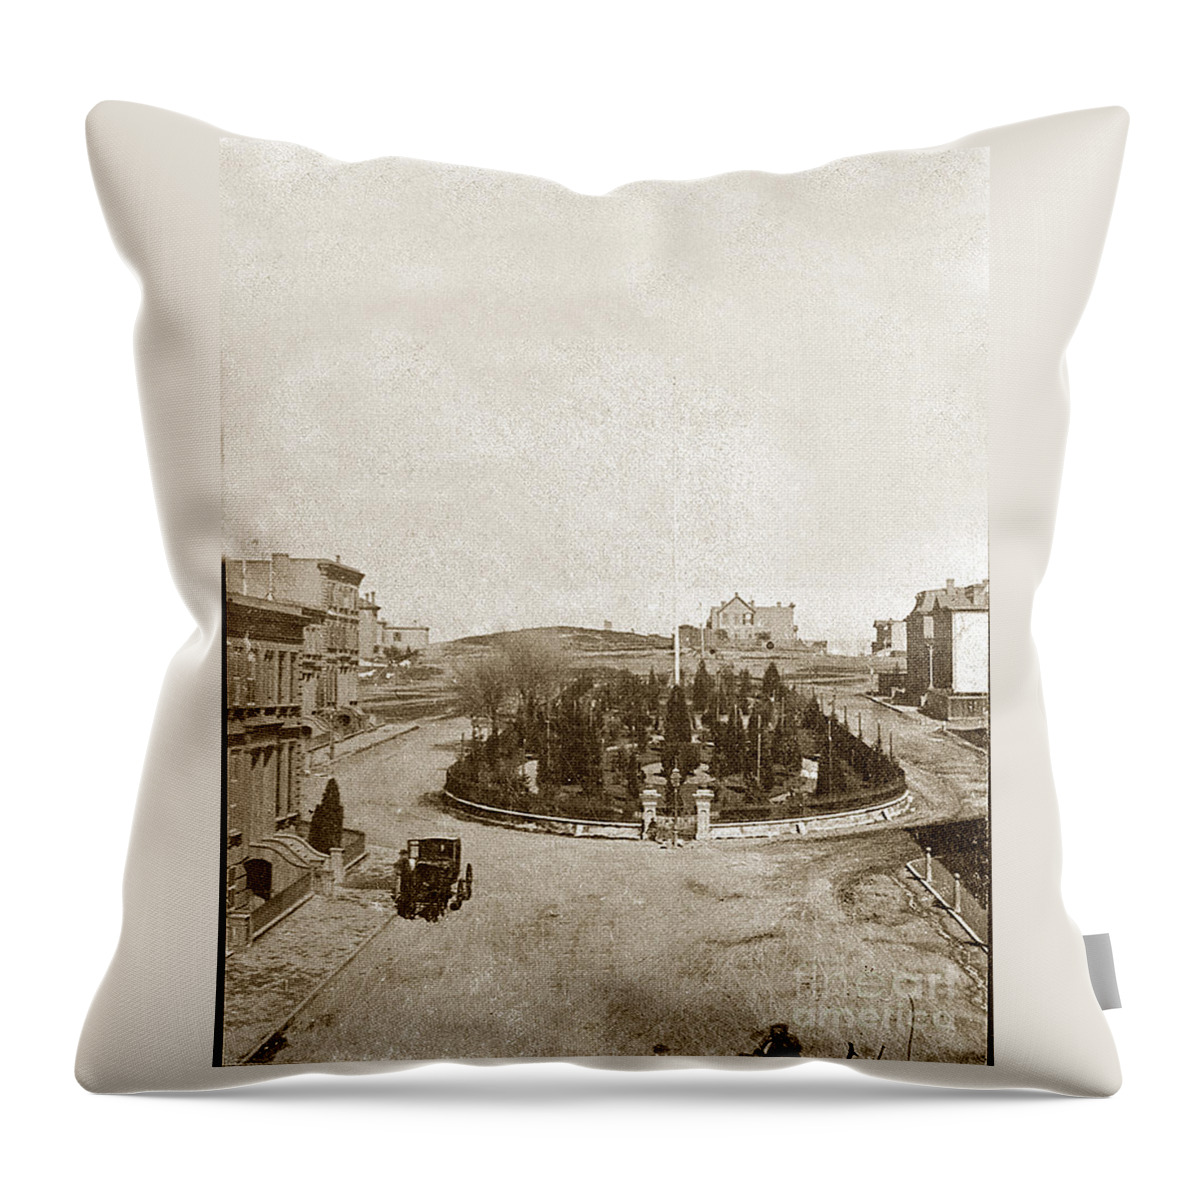 South Park Throw Pillow featuring the photograph South Park San Francisco Circa 1870 by Monterey County Historical Society